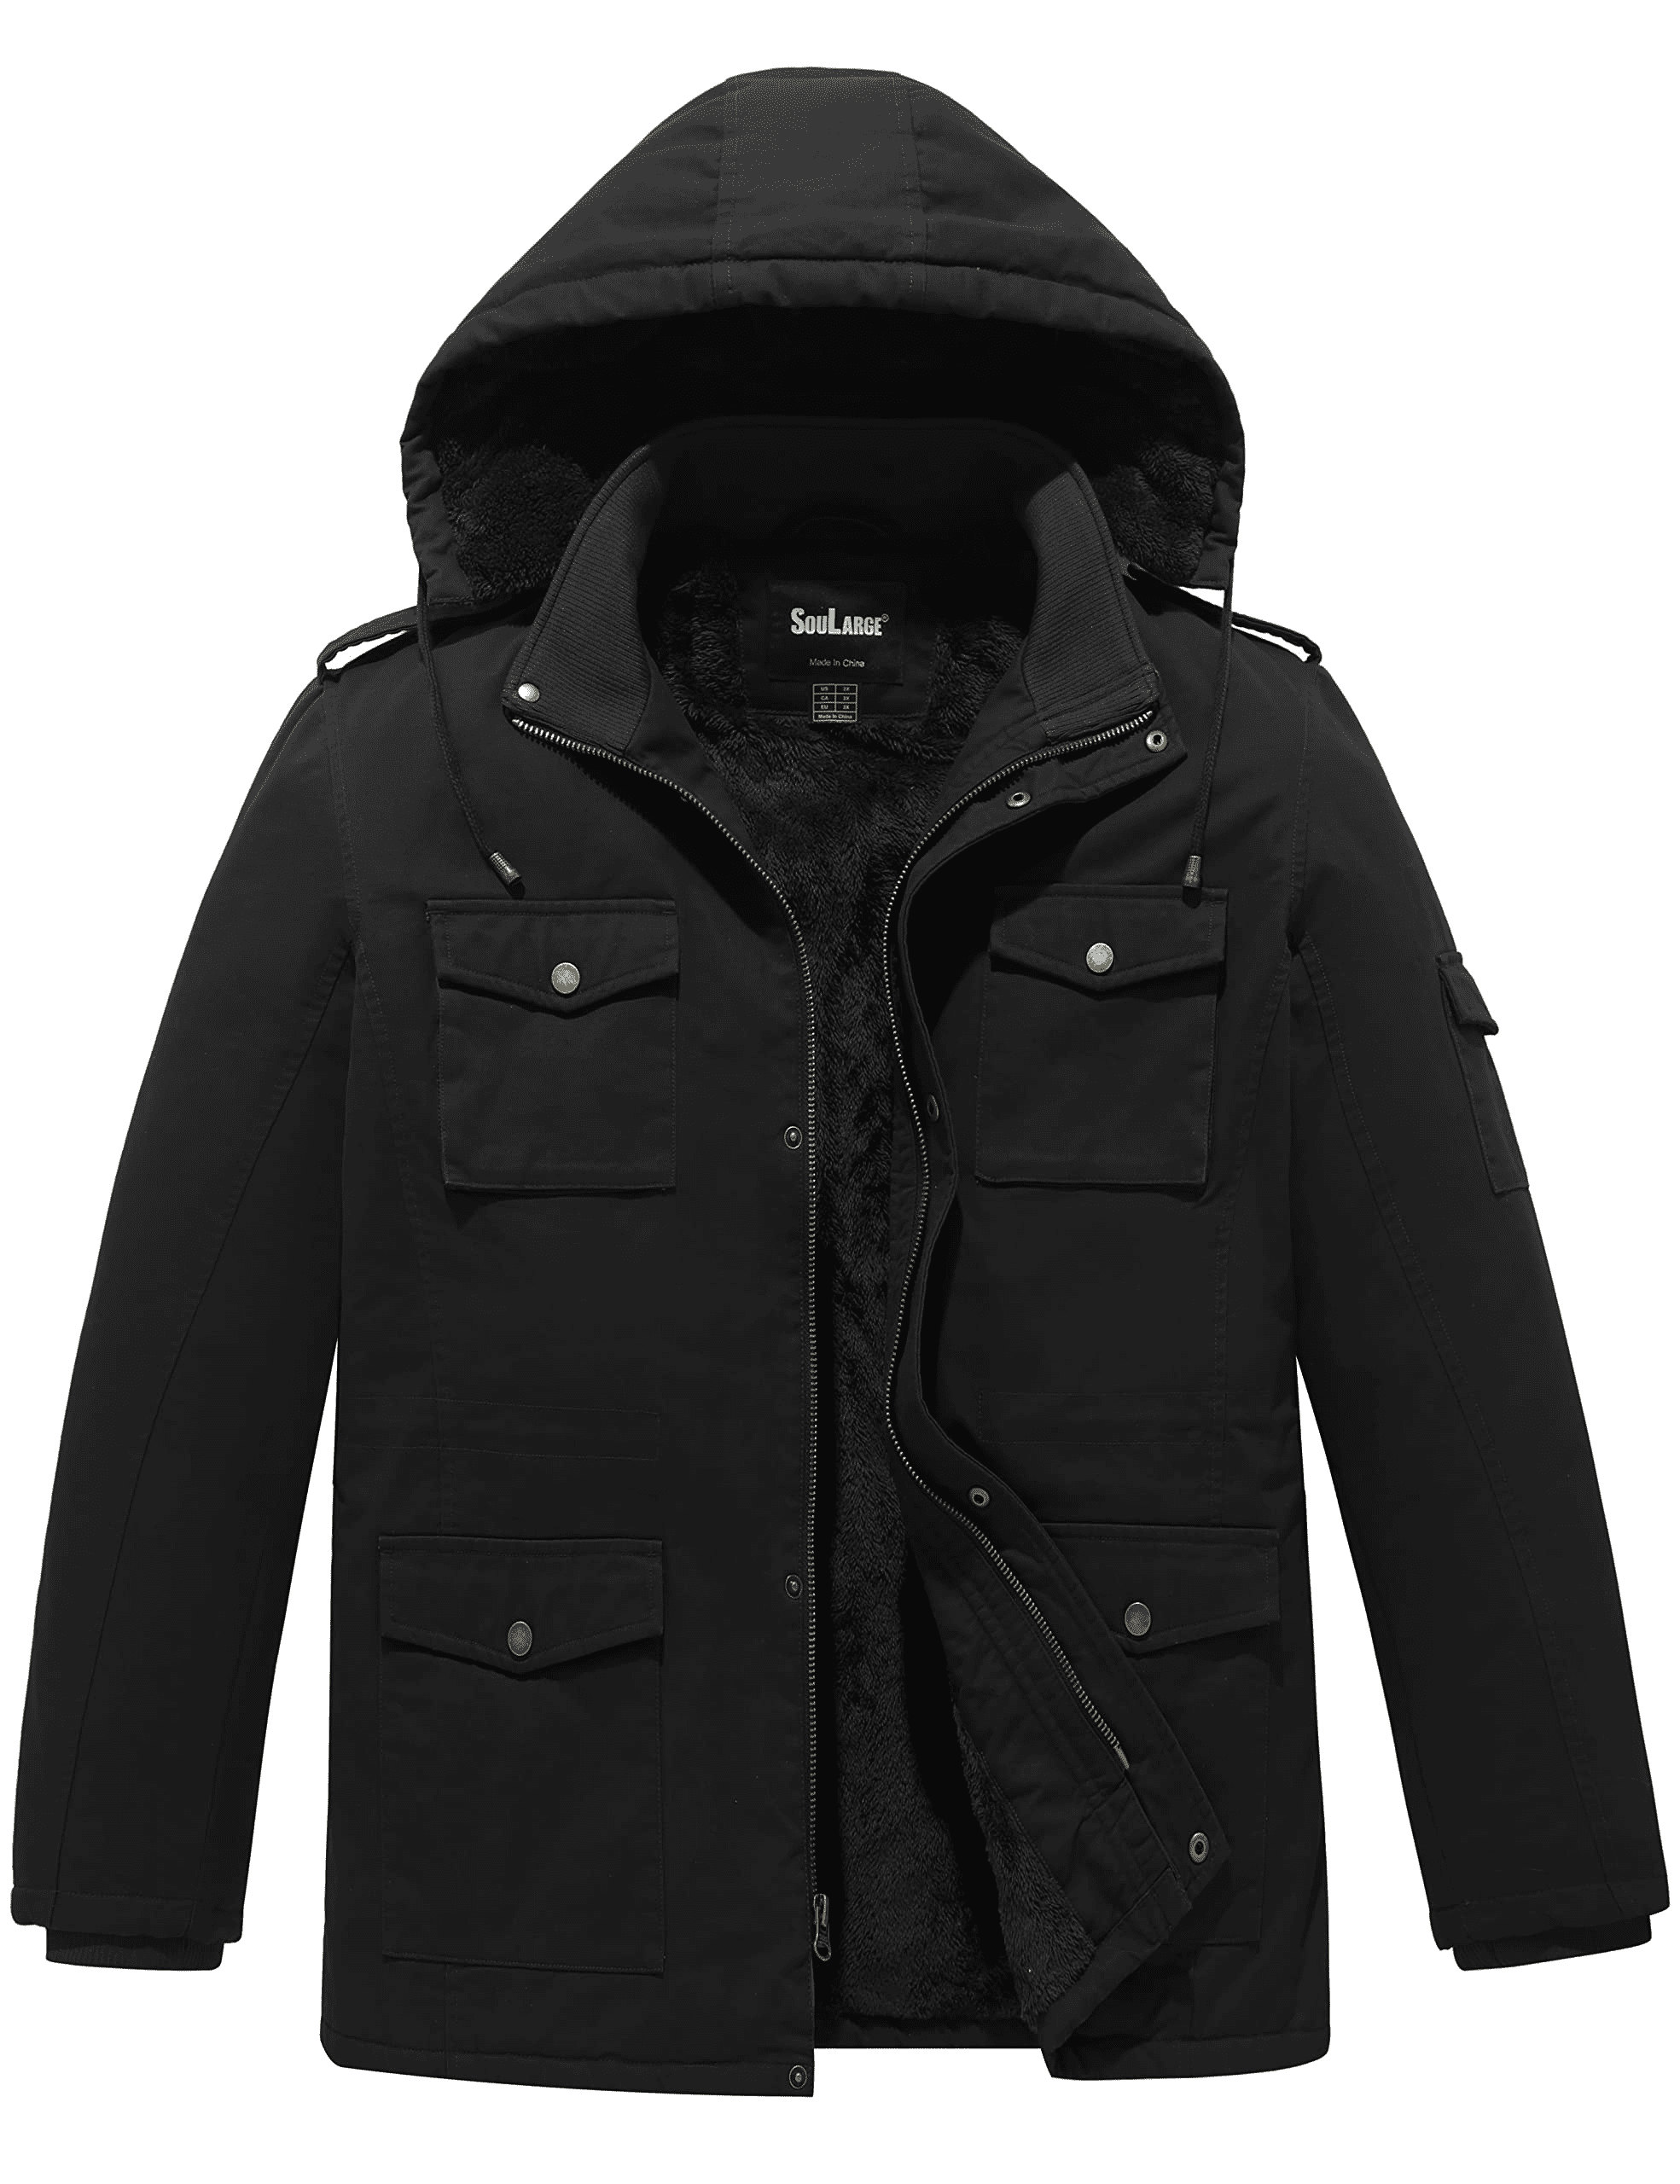 Soularge Men's Big and Tall Military Utility Workwear Cotton Parka Jacket  (Black, 3X)